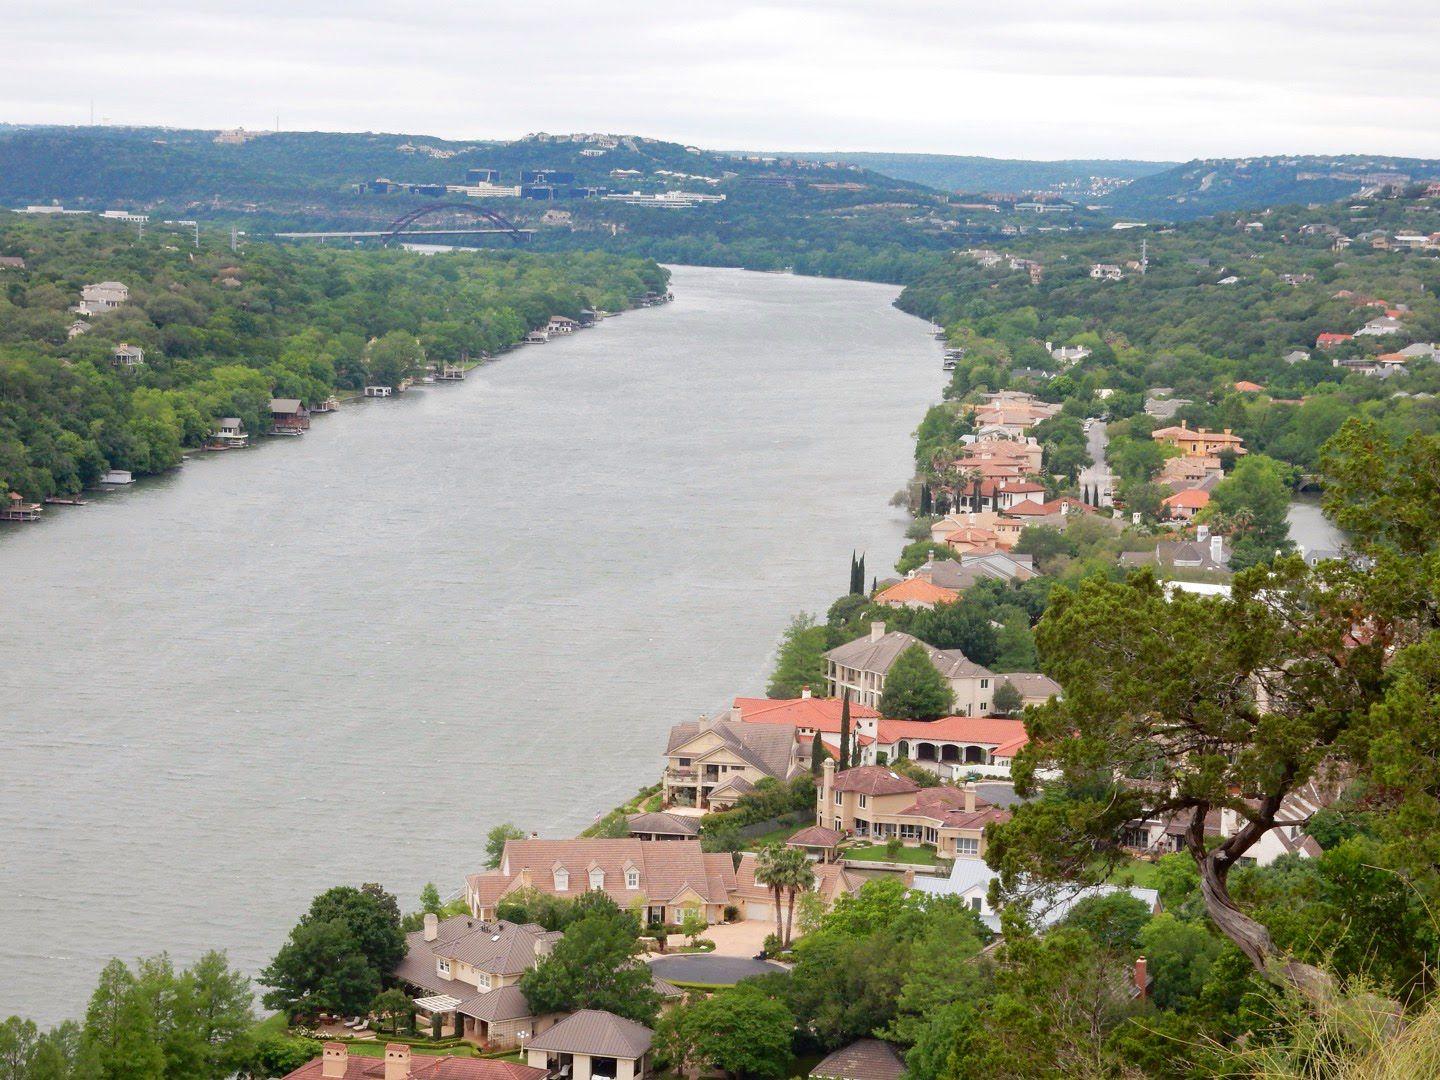 The river of Lady Bird Lake from Mount Bonnell.